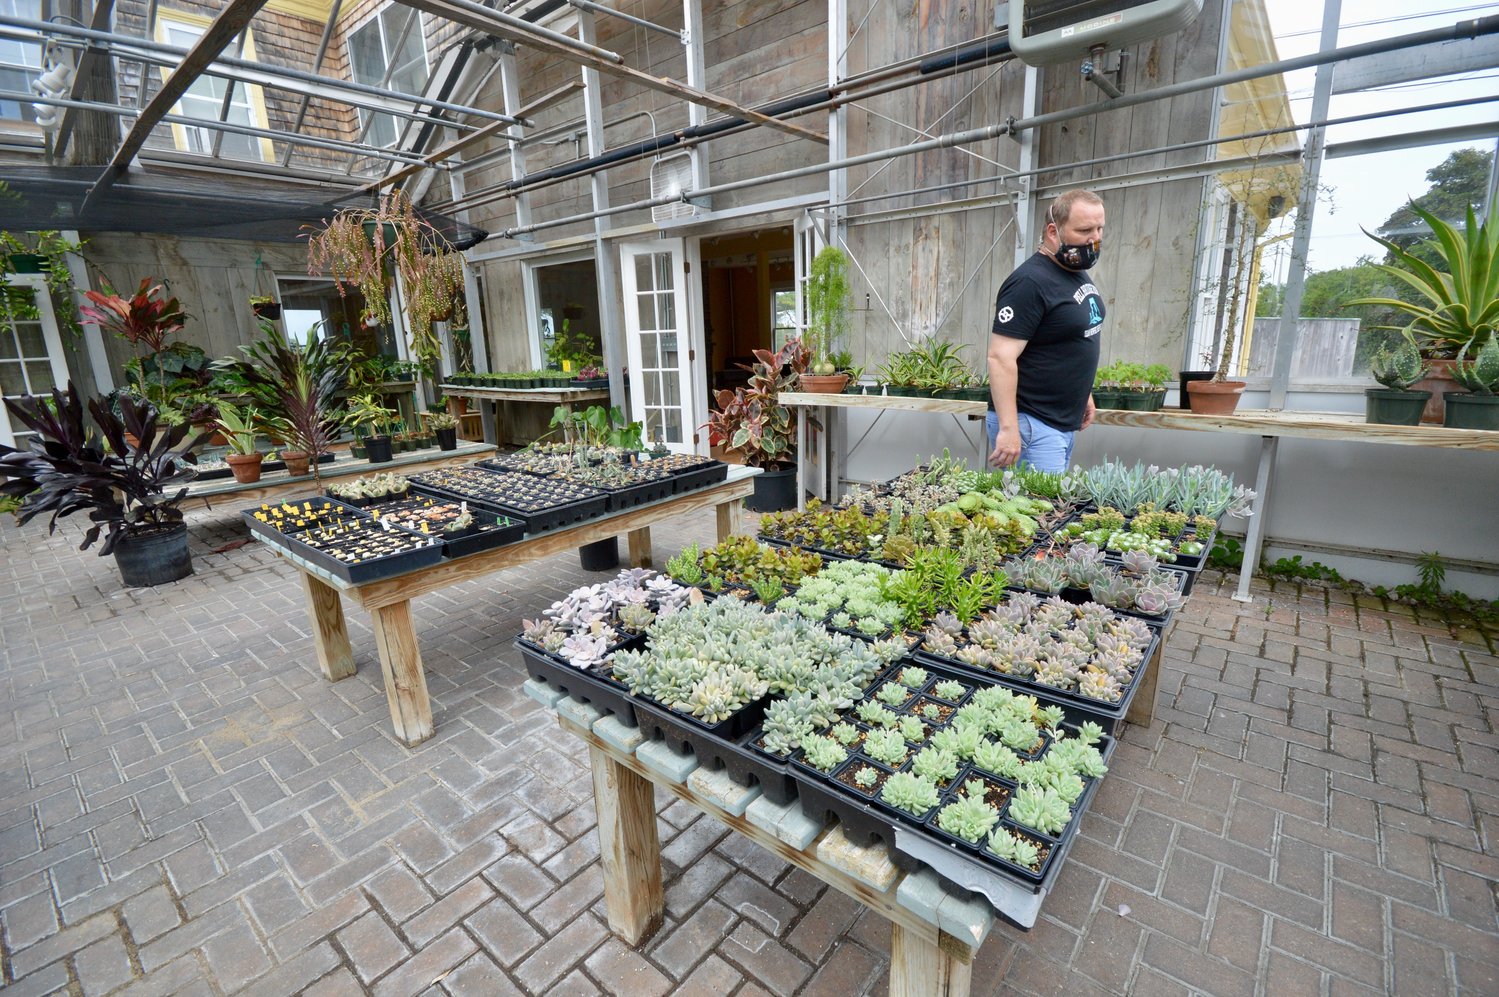 Matt Gray in Ragged Island’s greenhouse that holds hundreds of succulent plants that will be available for sale once the farm brewery opens.